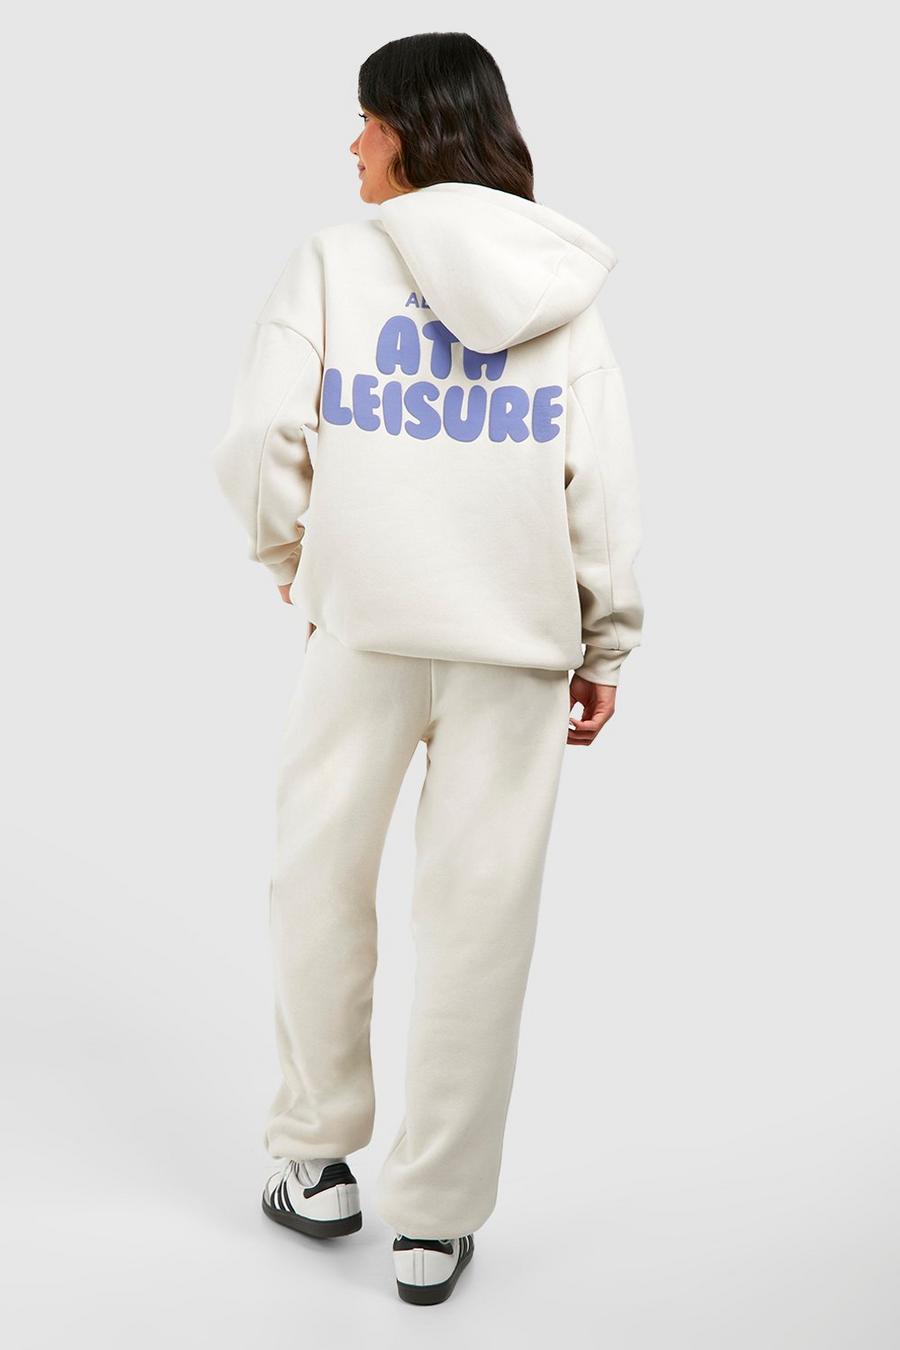 Stone Ath Leisure Puff Print Slogan Hooded Tracksuit